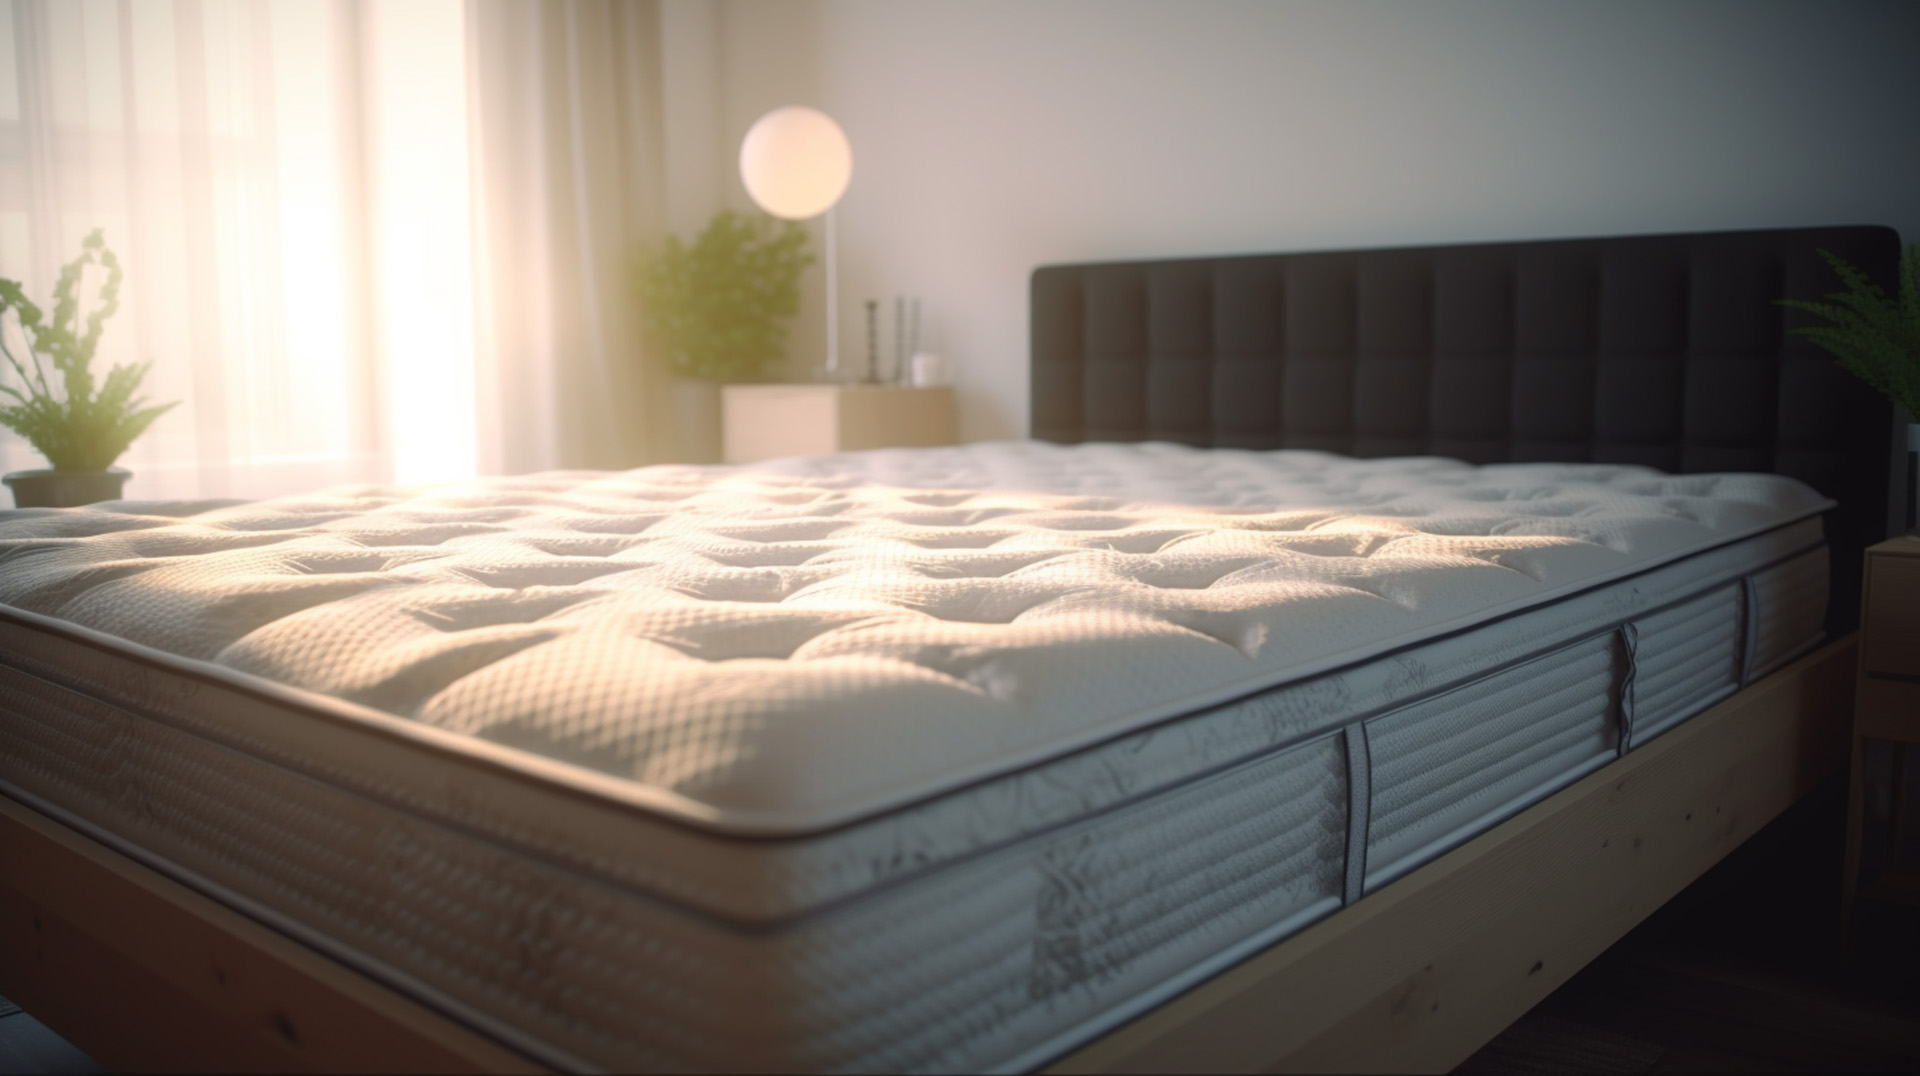 Shop Organic Mattresses and Beds in Medford, MA